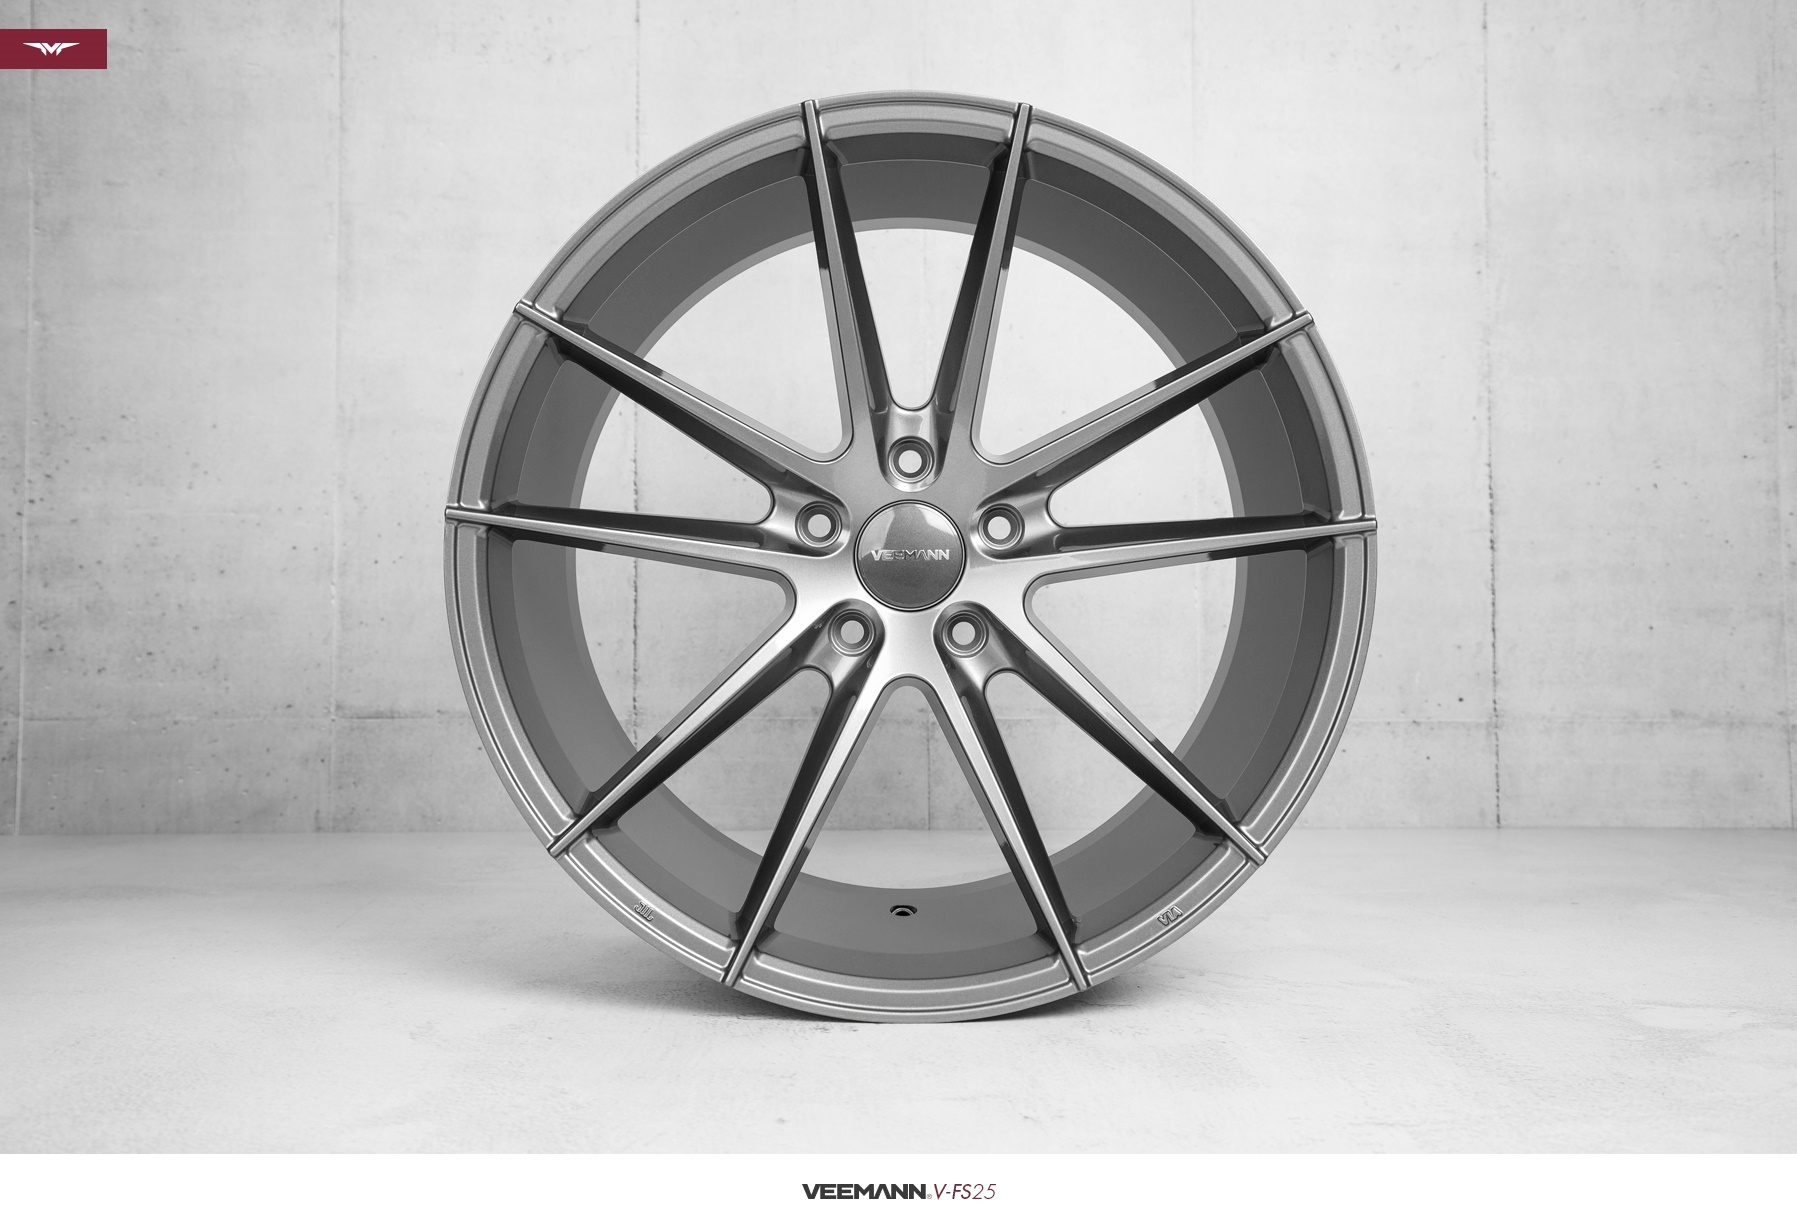 NEW 20  VEEMANN V FS25 ALLOY WHEELS IN GLOSS GRAPHITE WITH WIDER 10  REARS